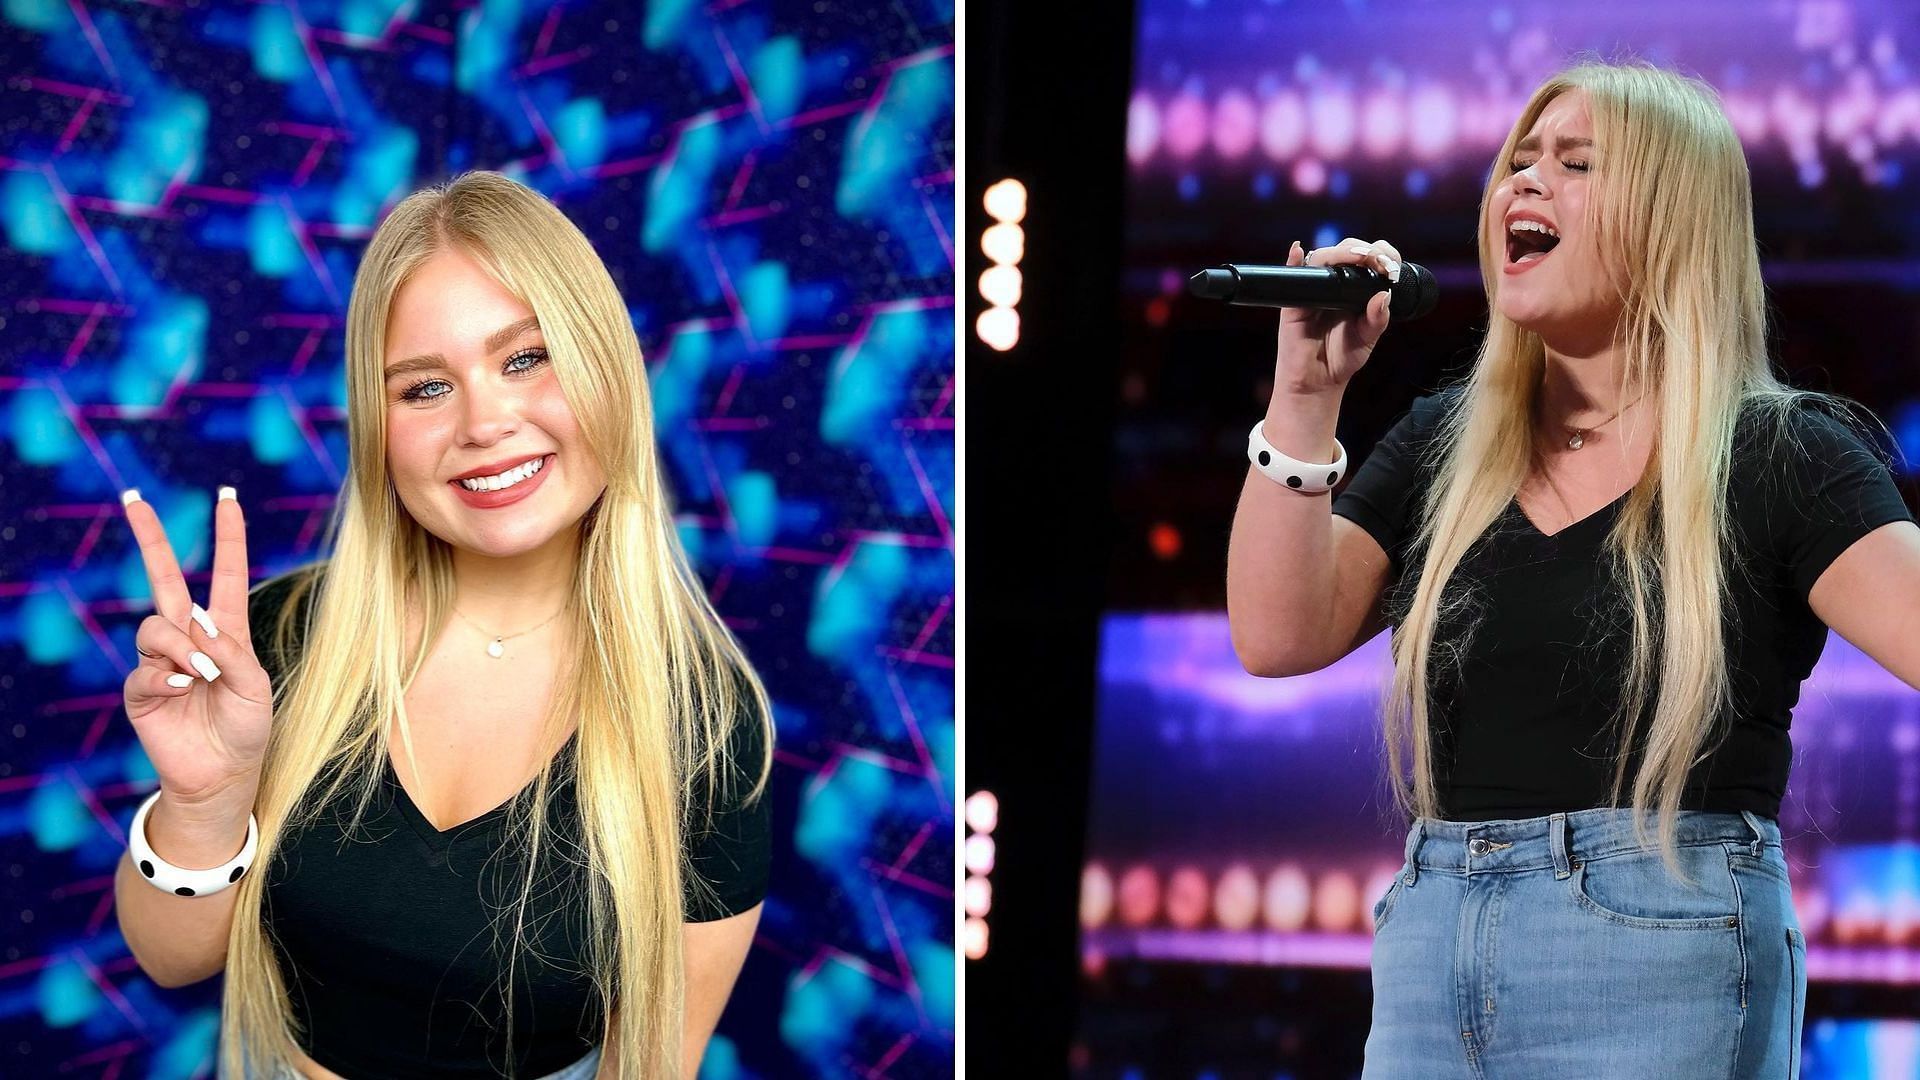 AGT contestant Ava Swiss shared her survival story ahead of her audition (Image via avaswissmusic/AGT)